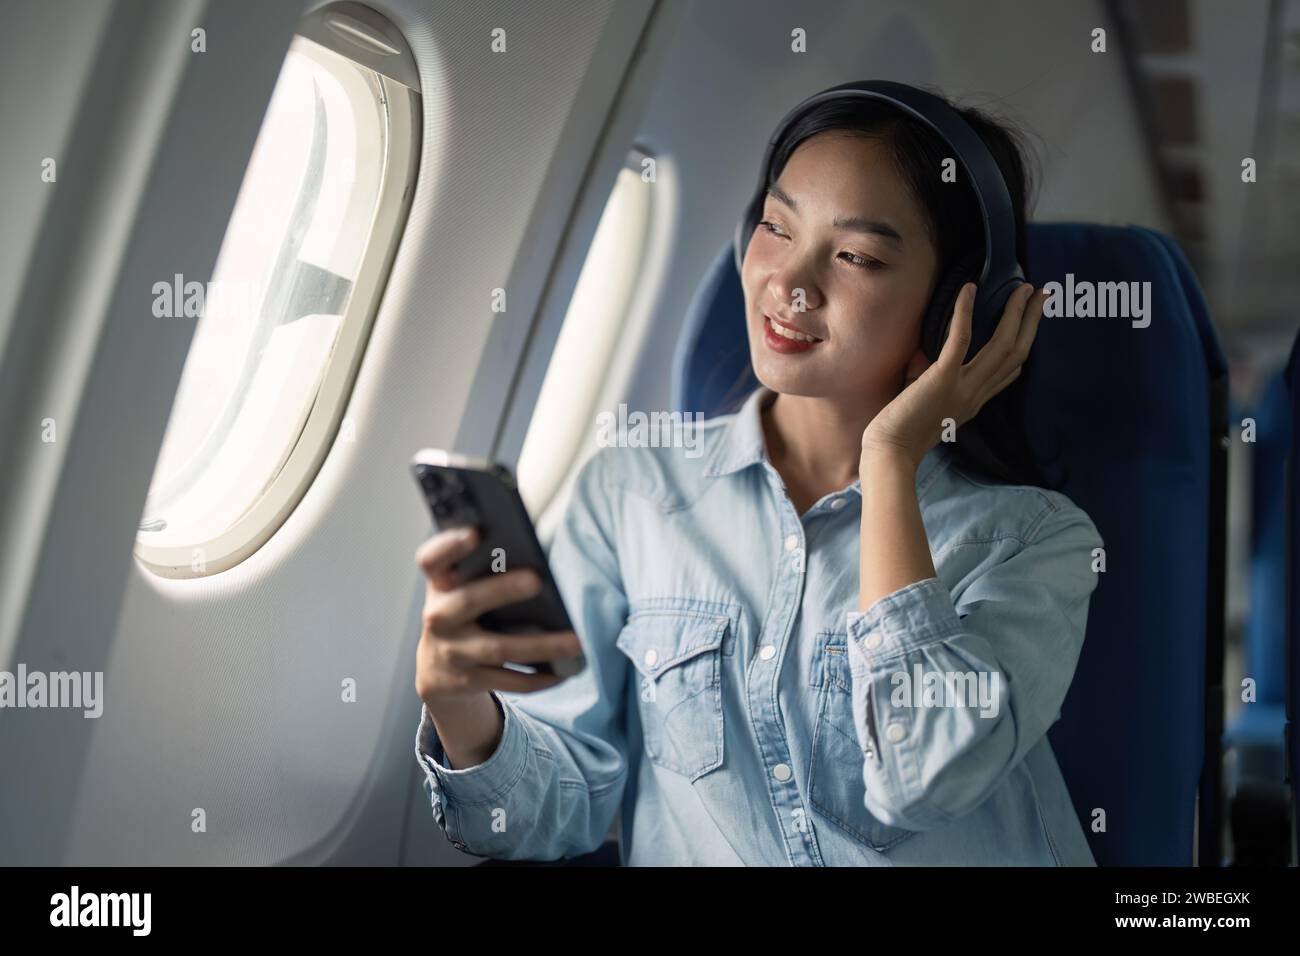 Asian woman traveler in airplane wearing headset listening music from mobile phone going on a trip vacation travel concept Stock Photo